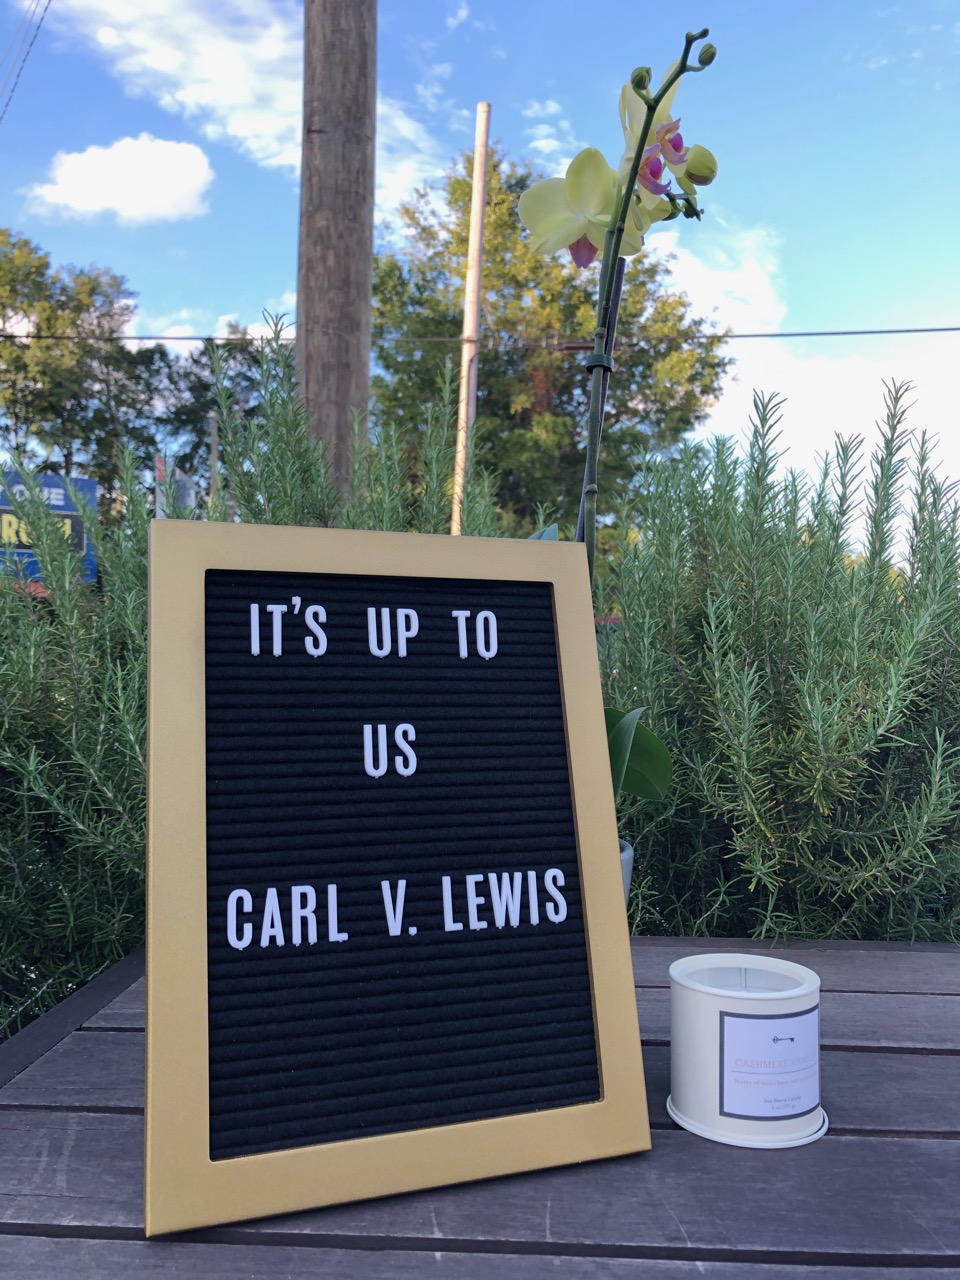 It's up to us - Carl V. Lewis